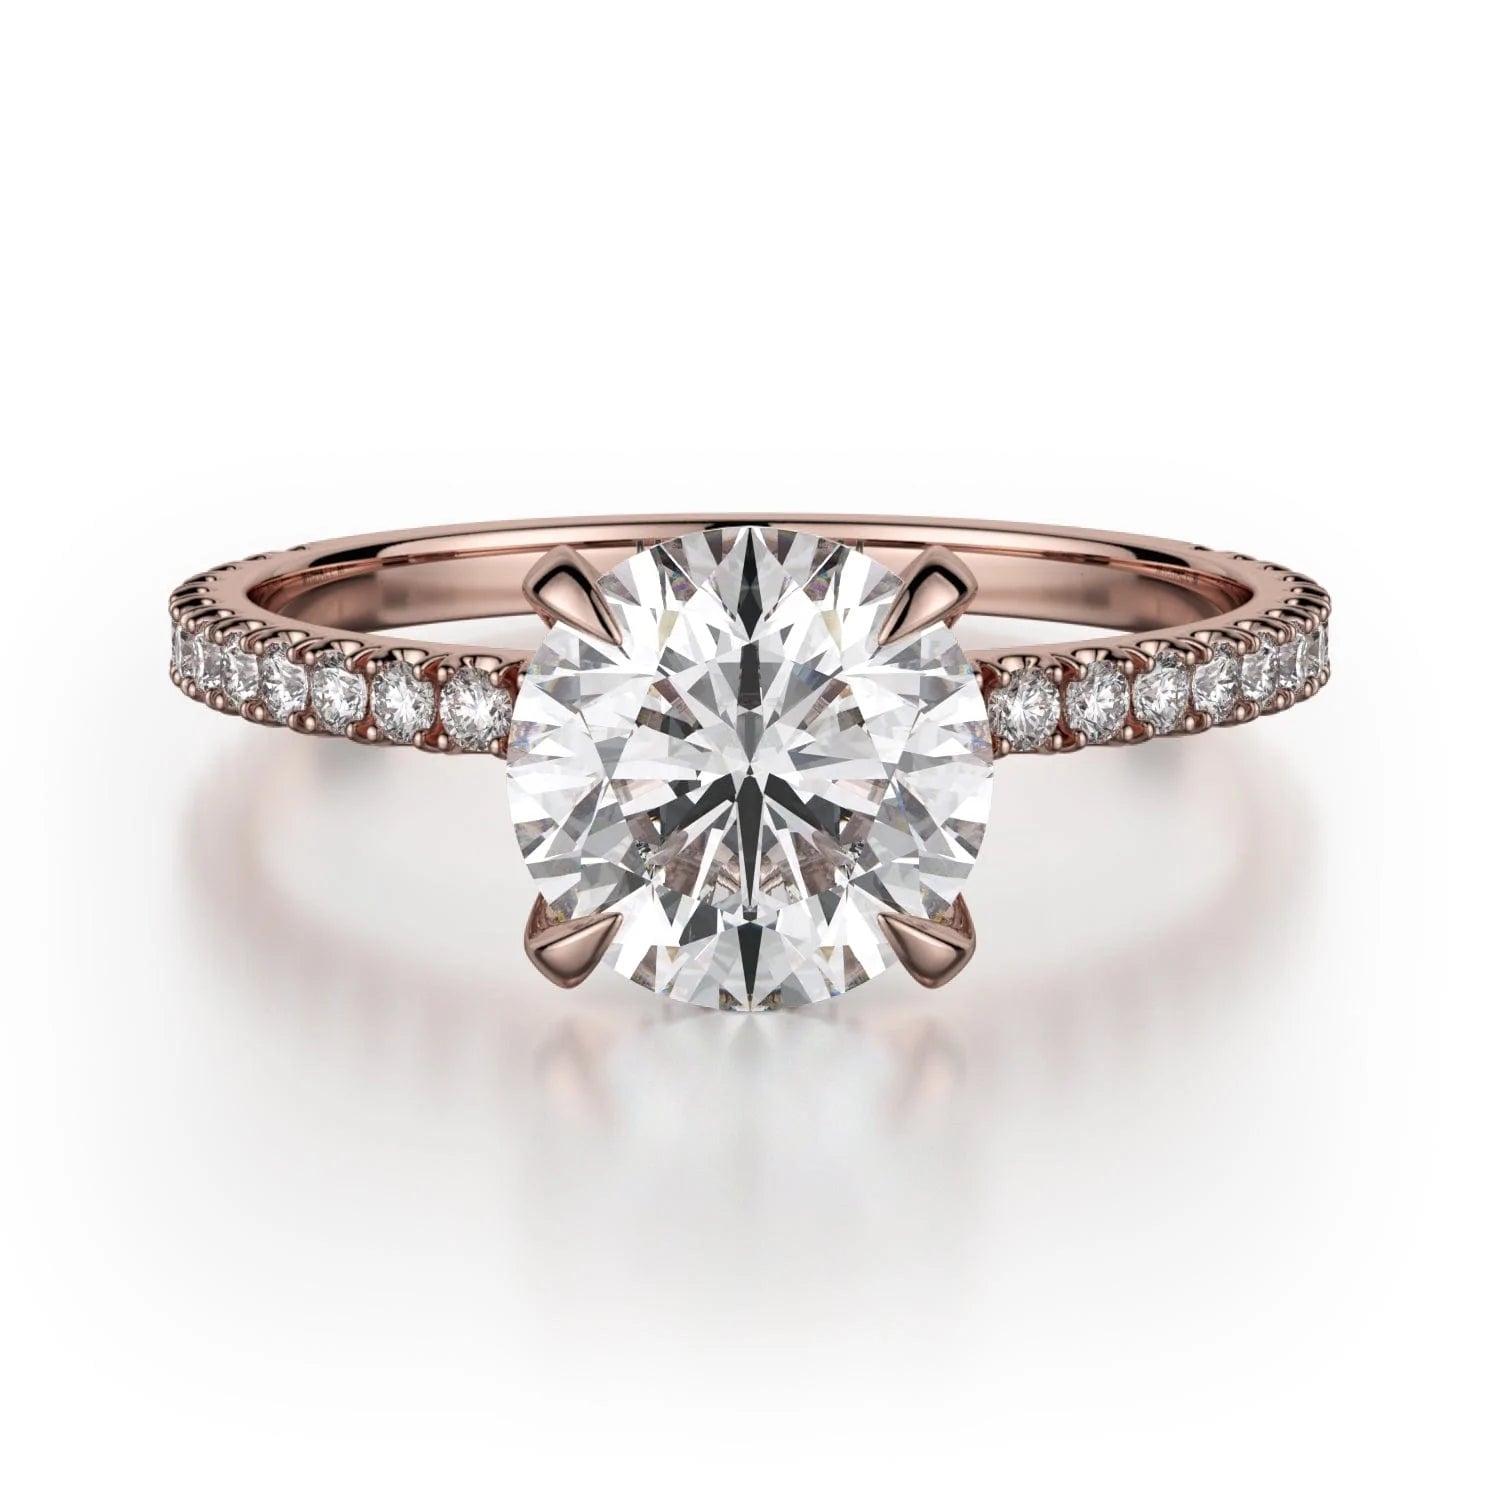 MICHAEL M Engagement Rings 18K Rose Gold CROWN R706-1.5 Brilliant Round Solitaire R706-1.5RG